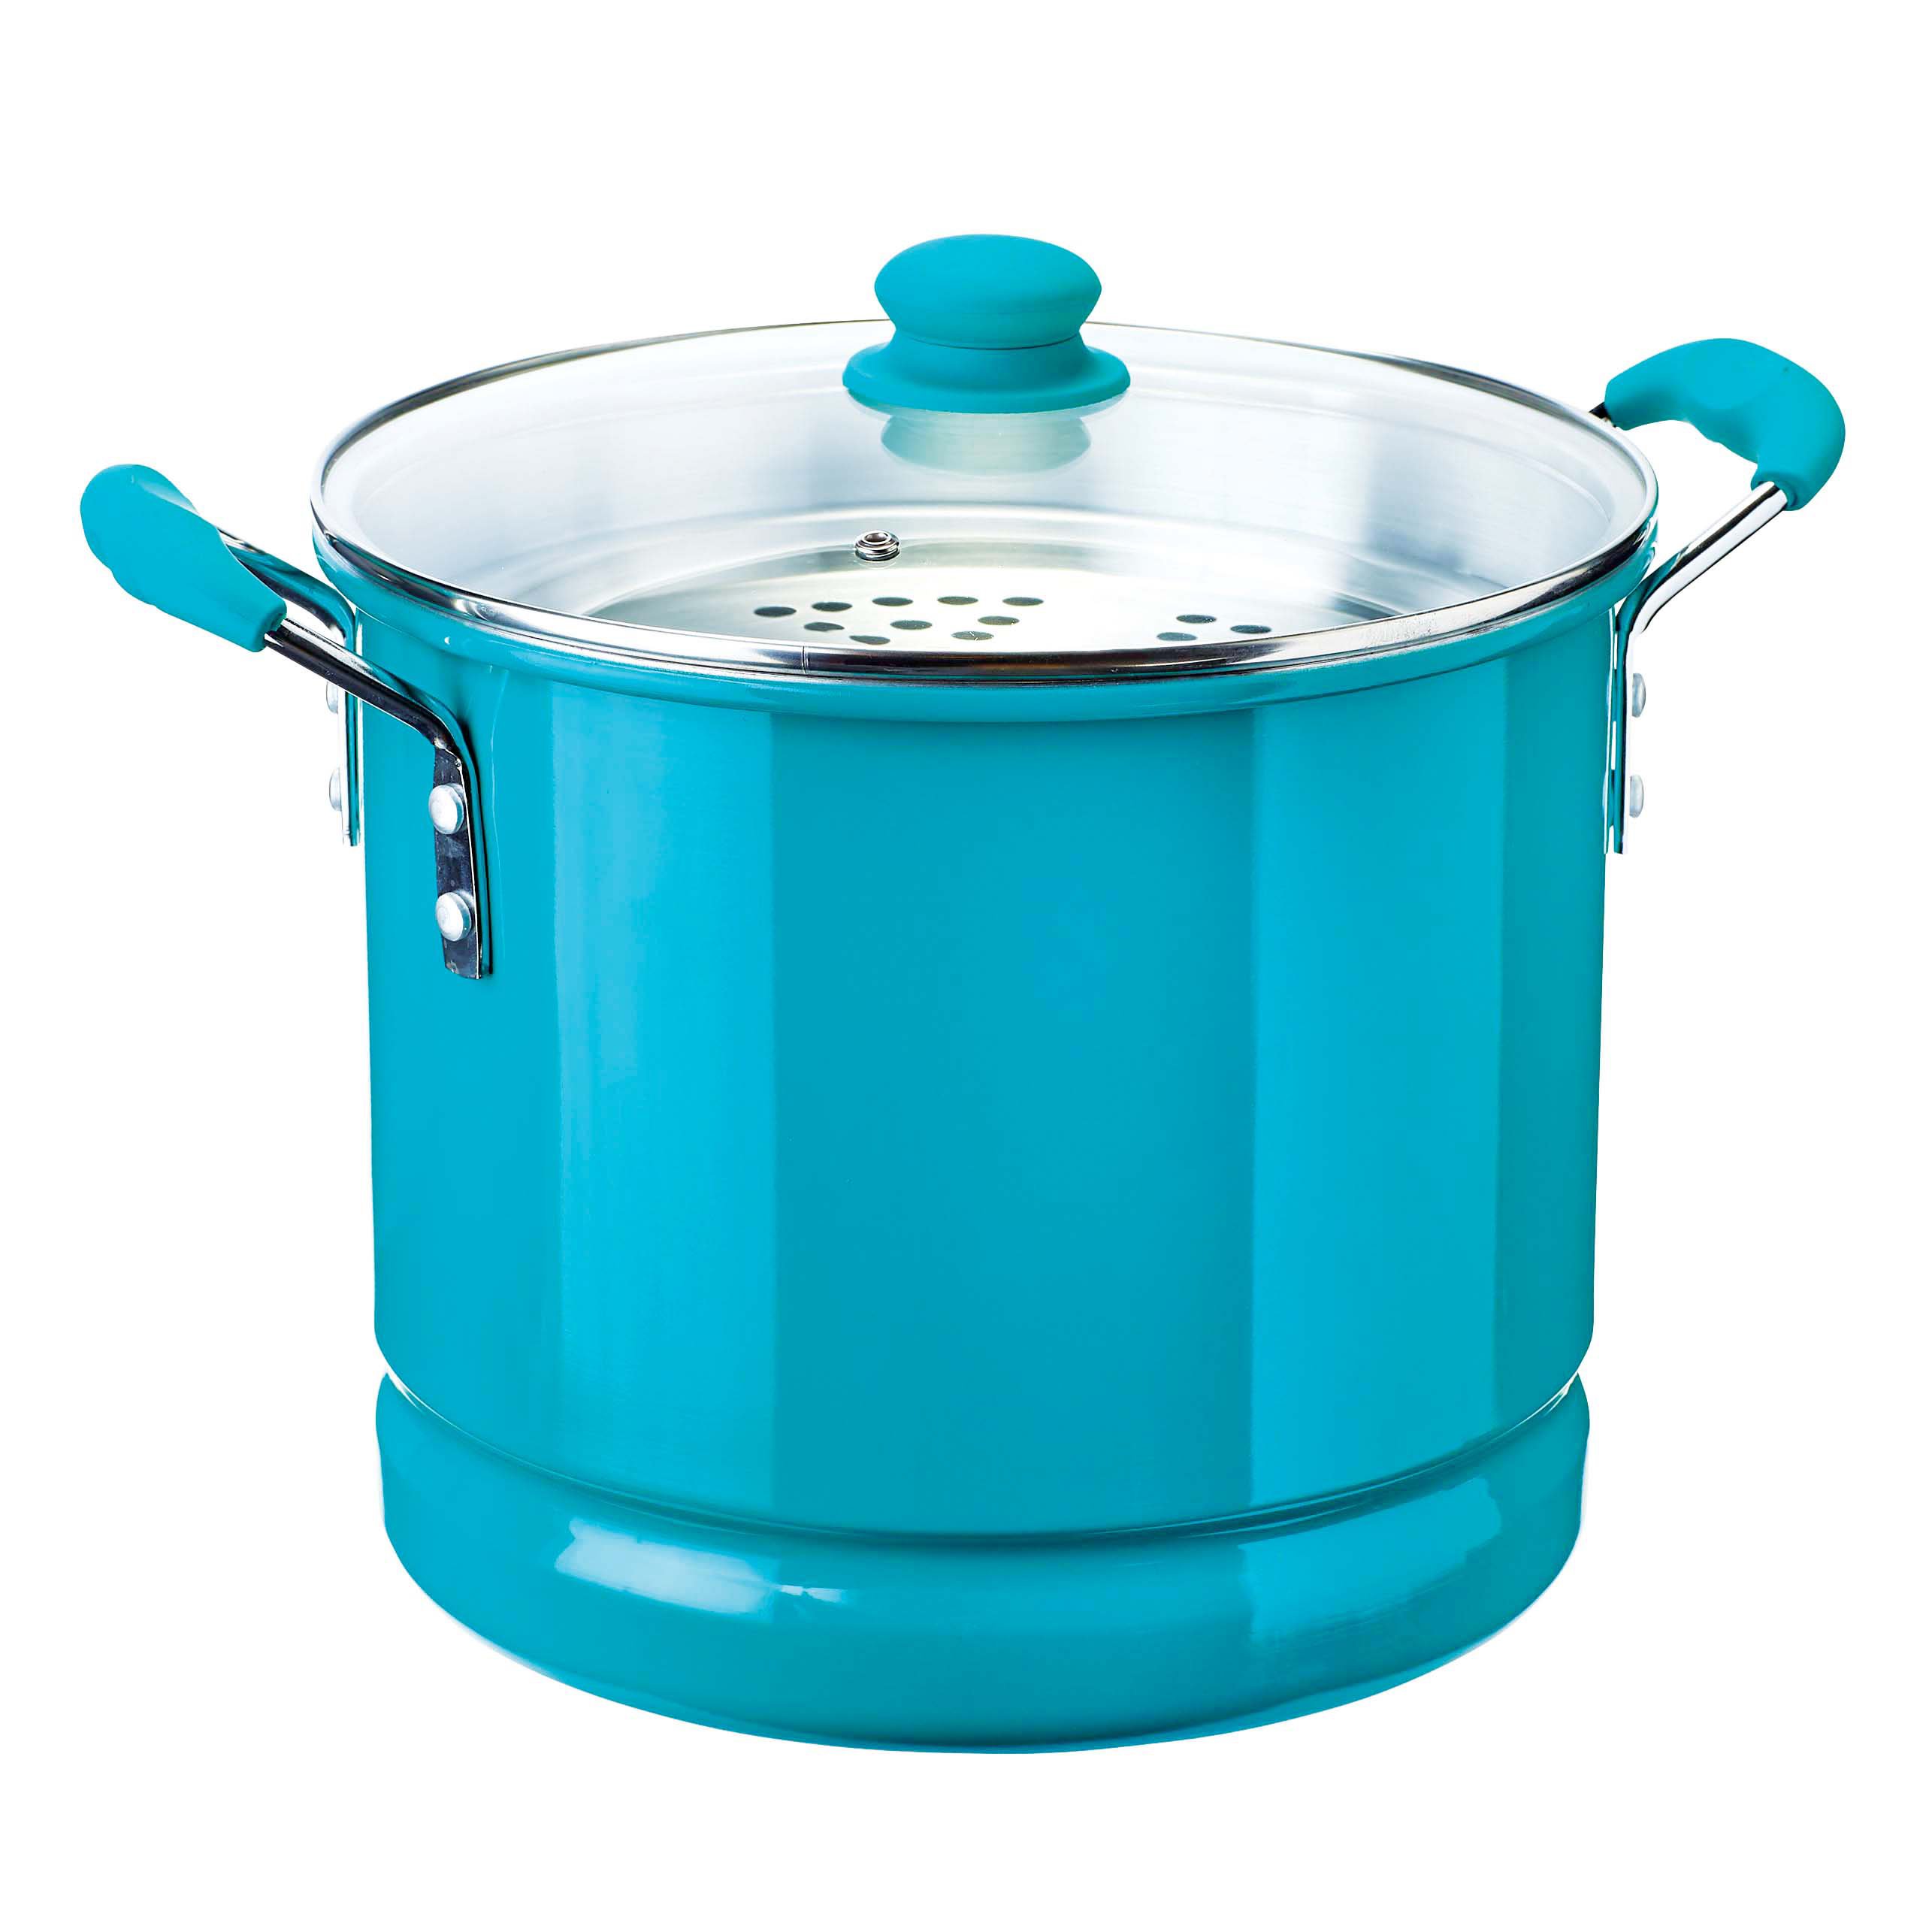 Imusa Tamale/Seafood Steamer with Lid & Insert - Shop Stock Pots & Sauce  Pans at H-E-B